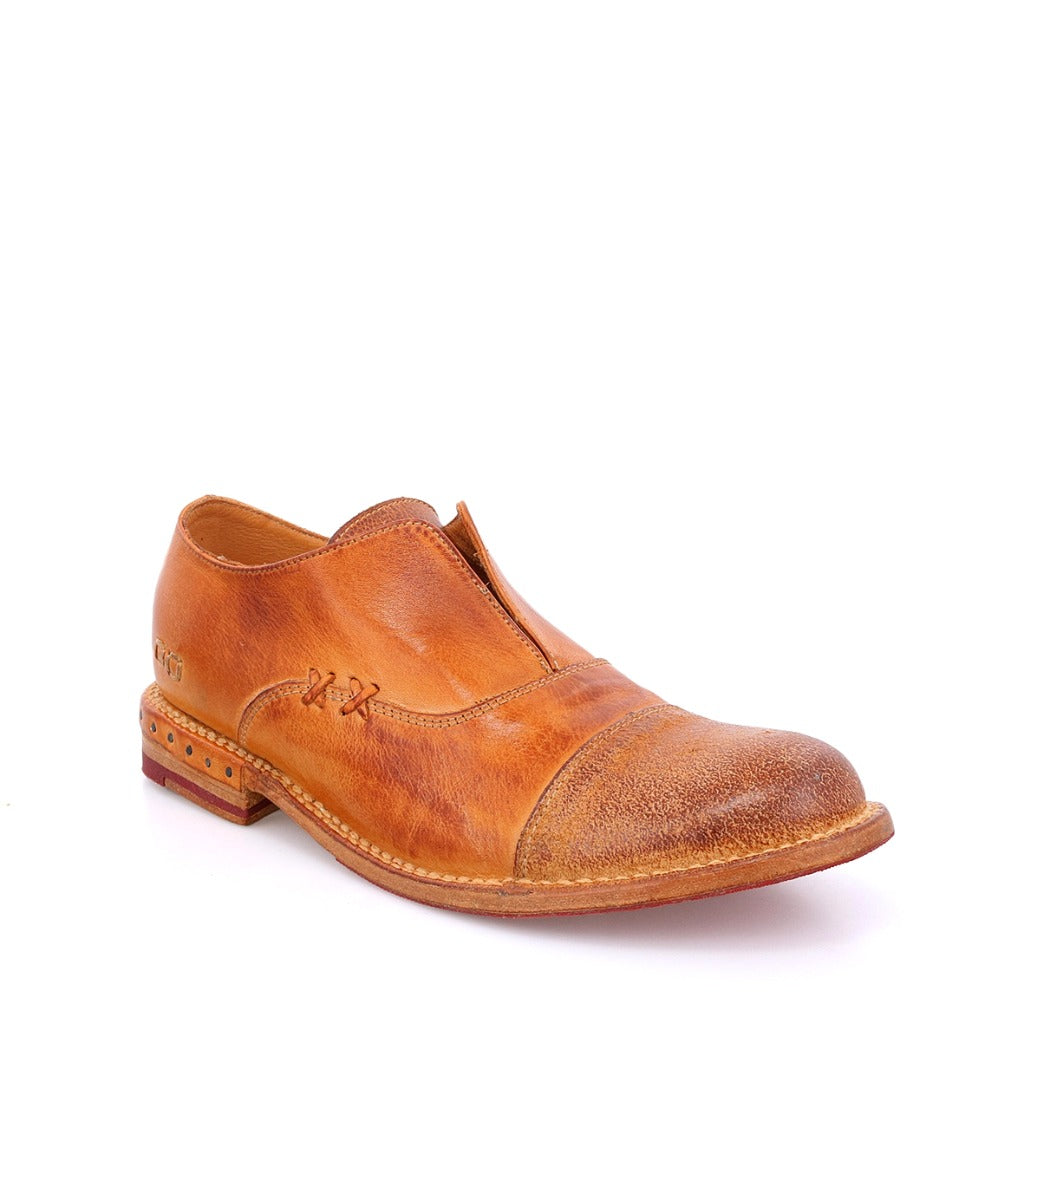 A men's tan leather Rose shoe by Bed Stu on a white background.